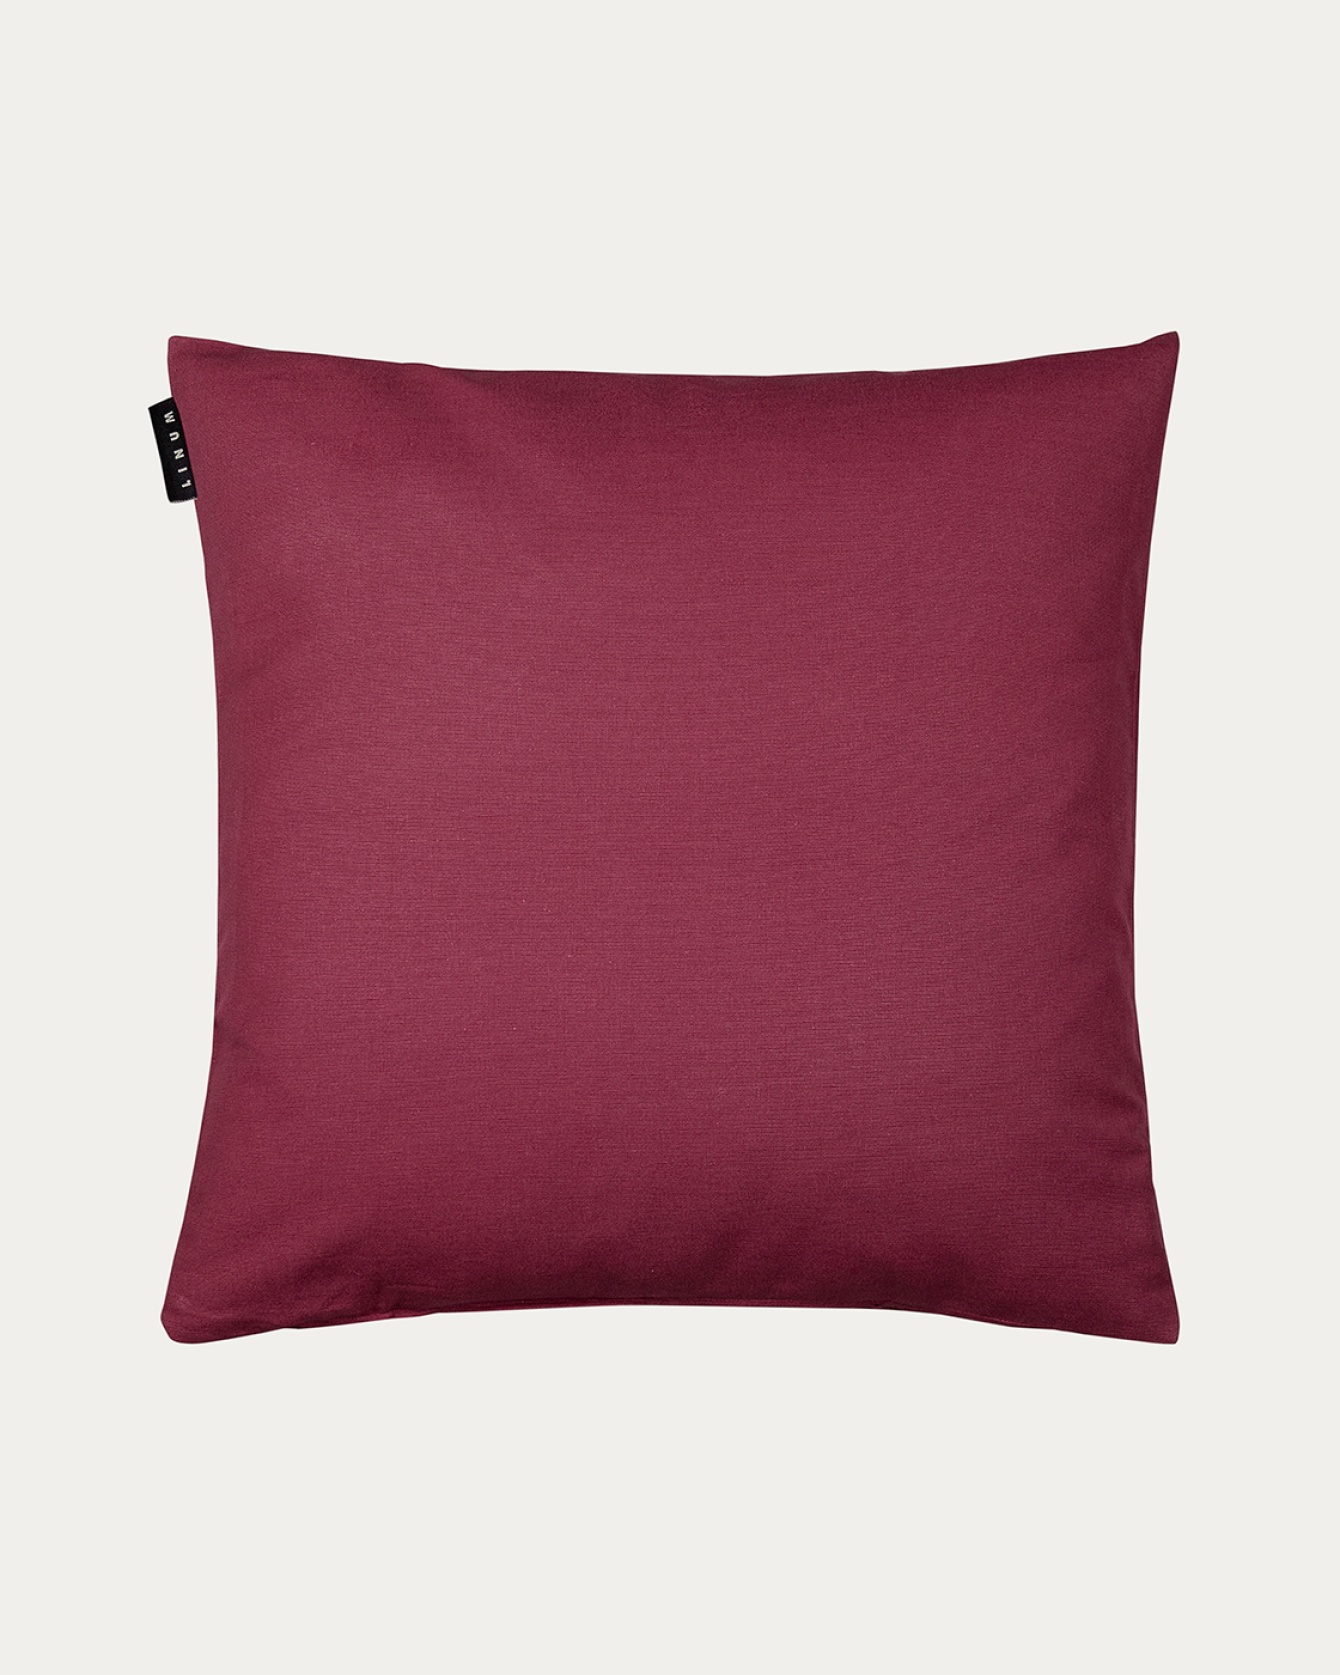 ANNABELL Cushion cover 50x50 cm Pale wine red